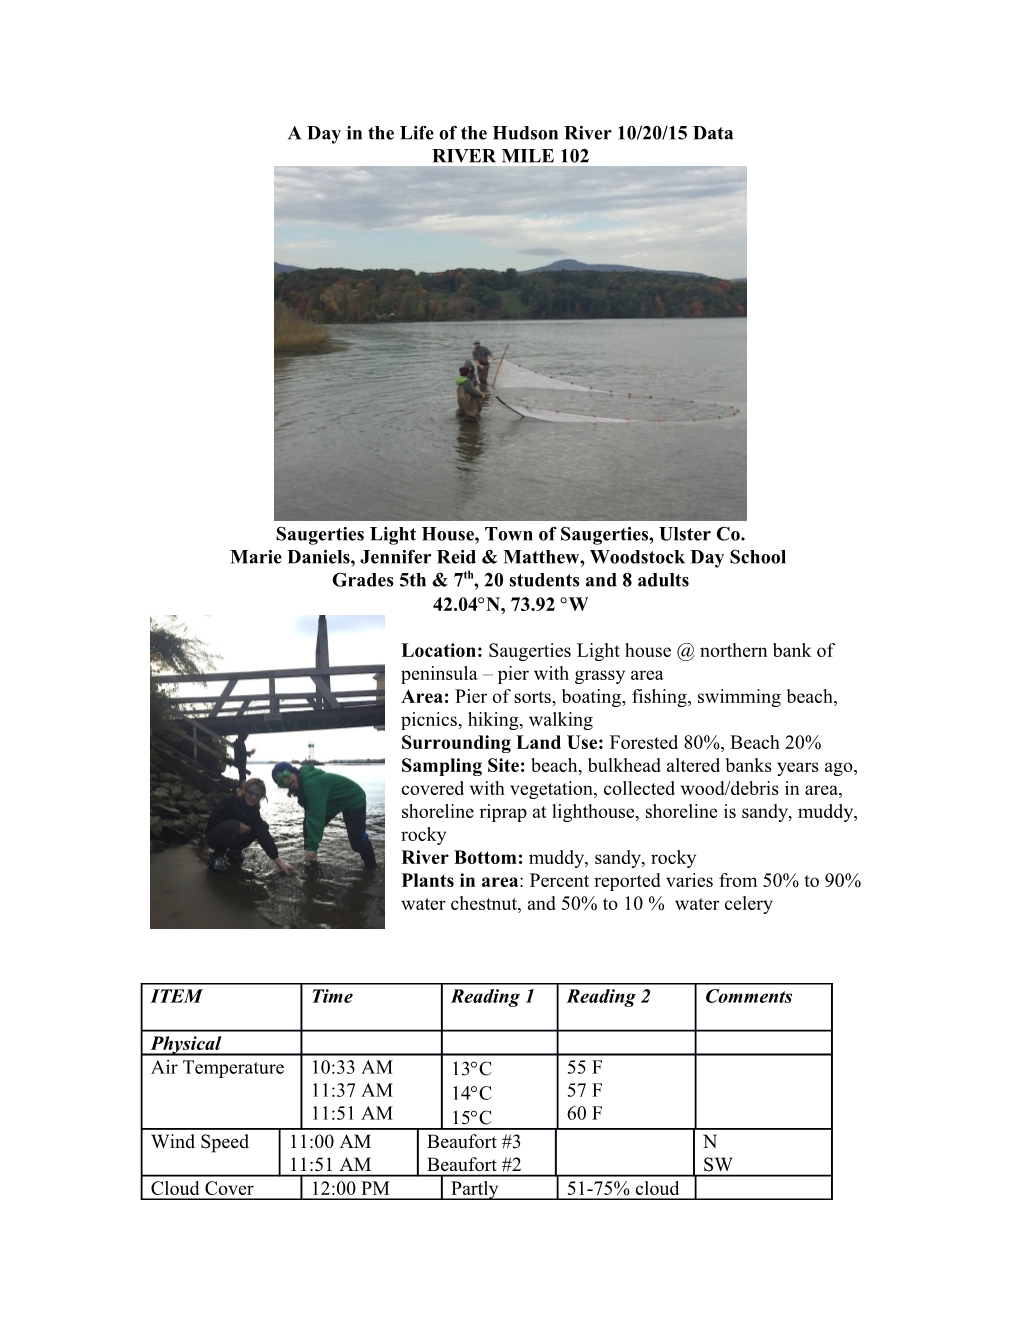 A Day in the Life of the Hudson River 10/20/15Data